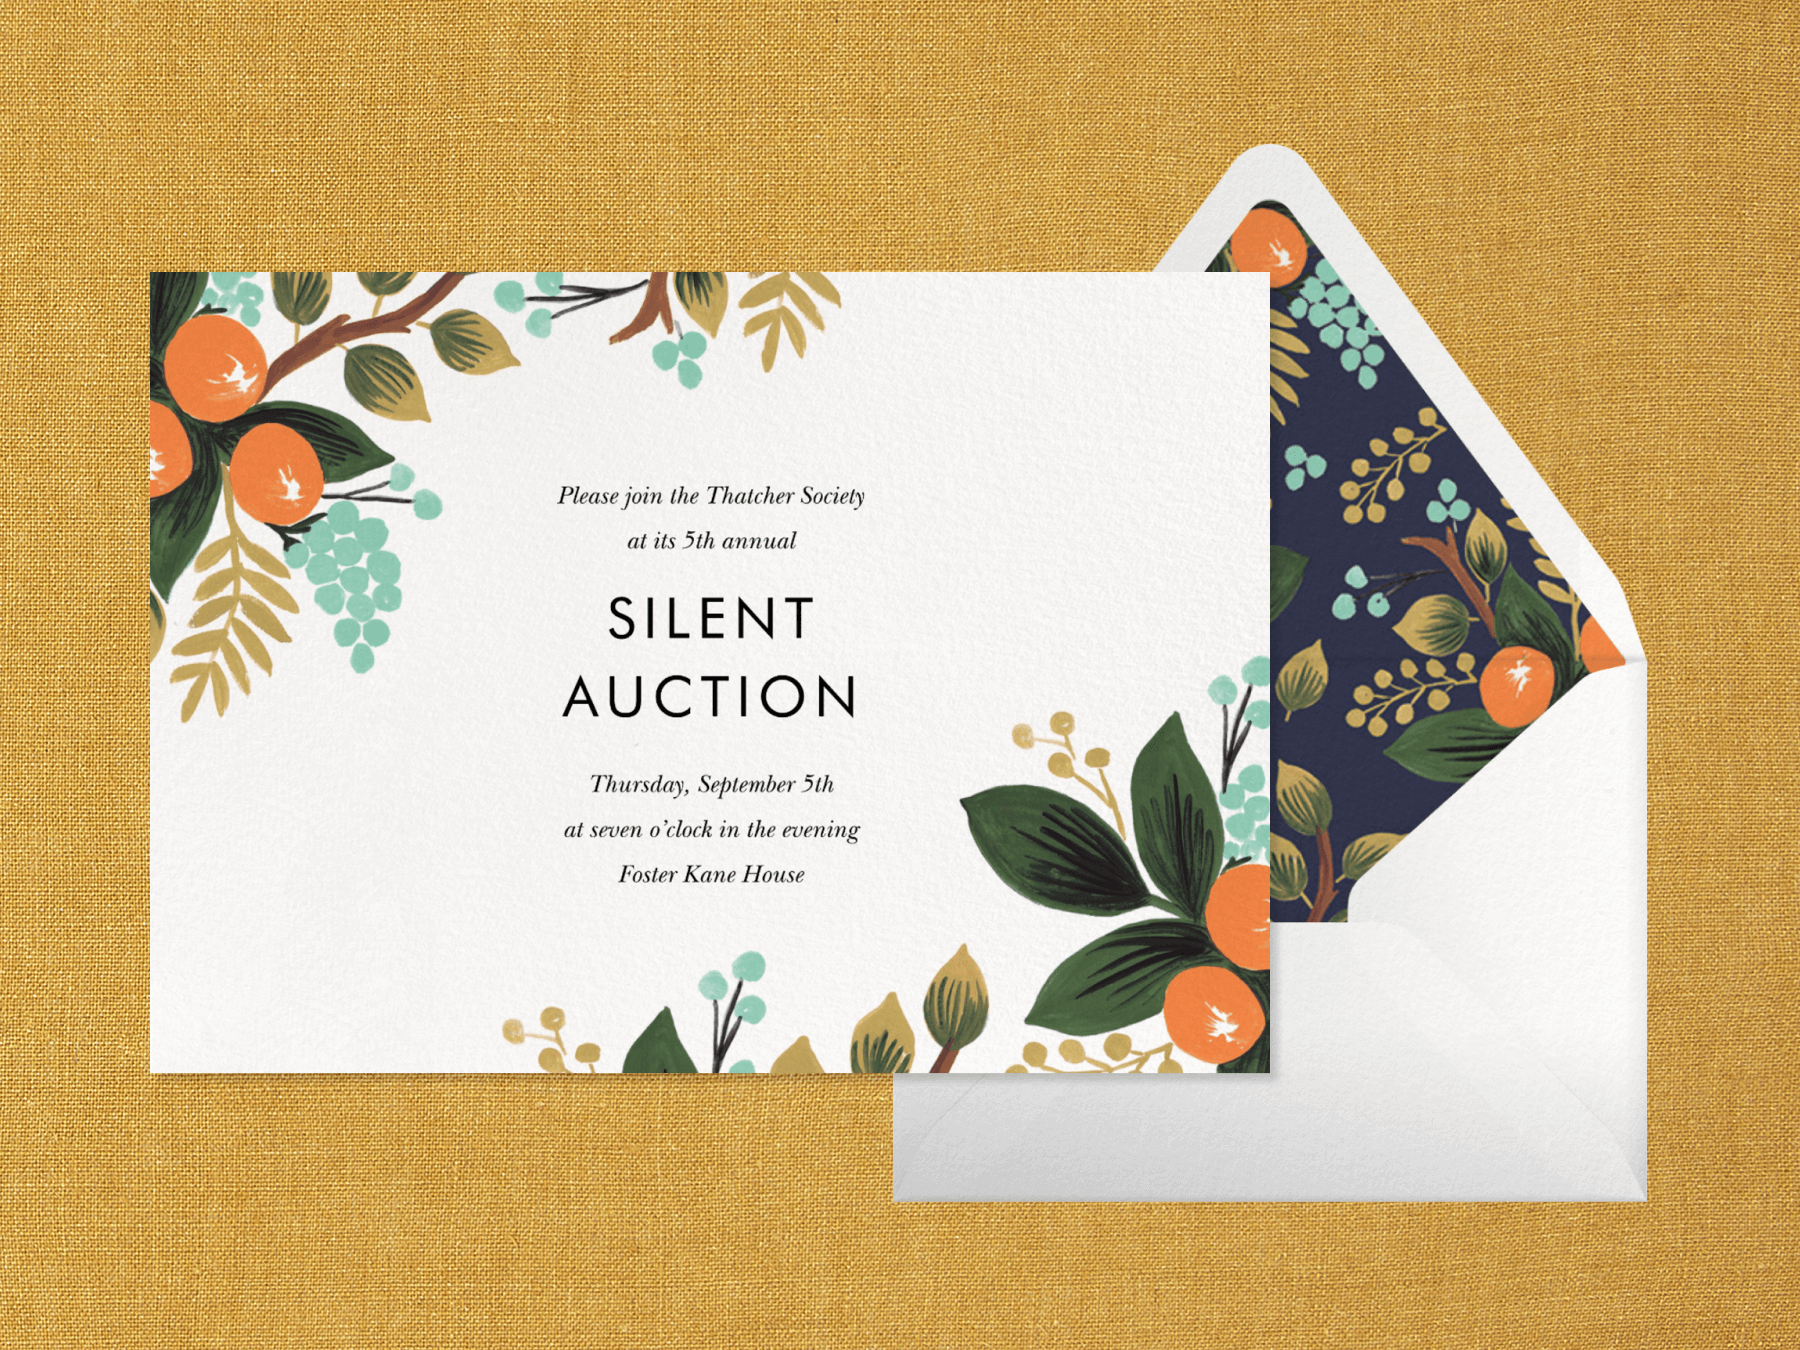 An invitation for a silent auction with colorful illustrations of orange tree branches in two corners and an envelope with matching liner.